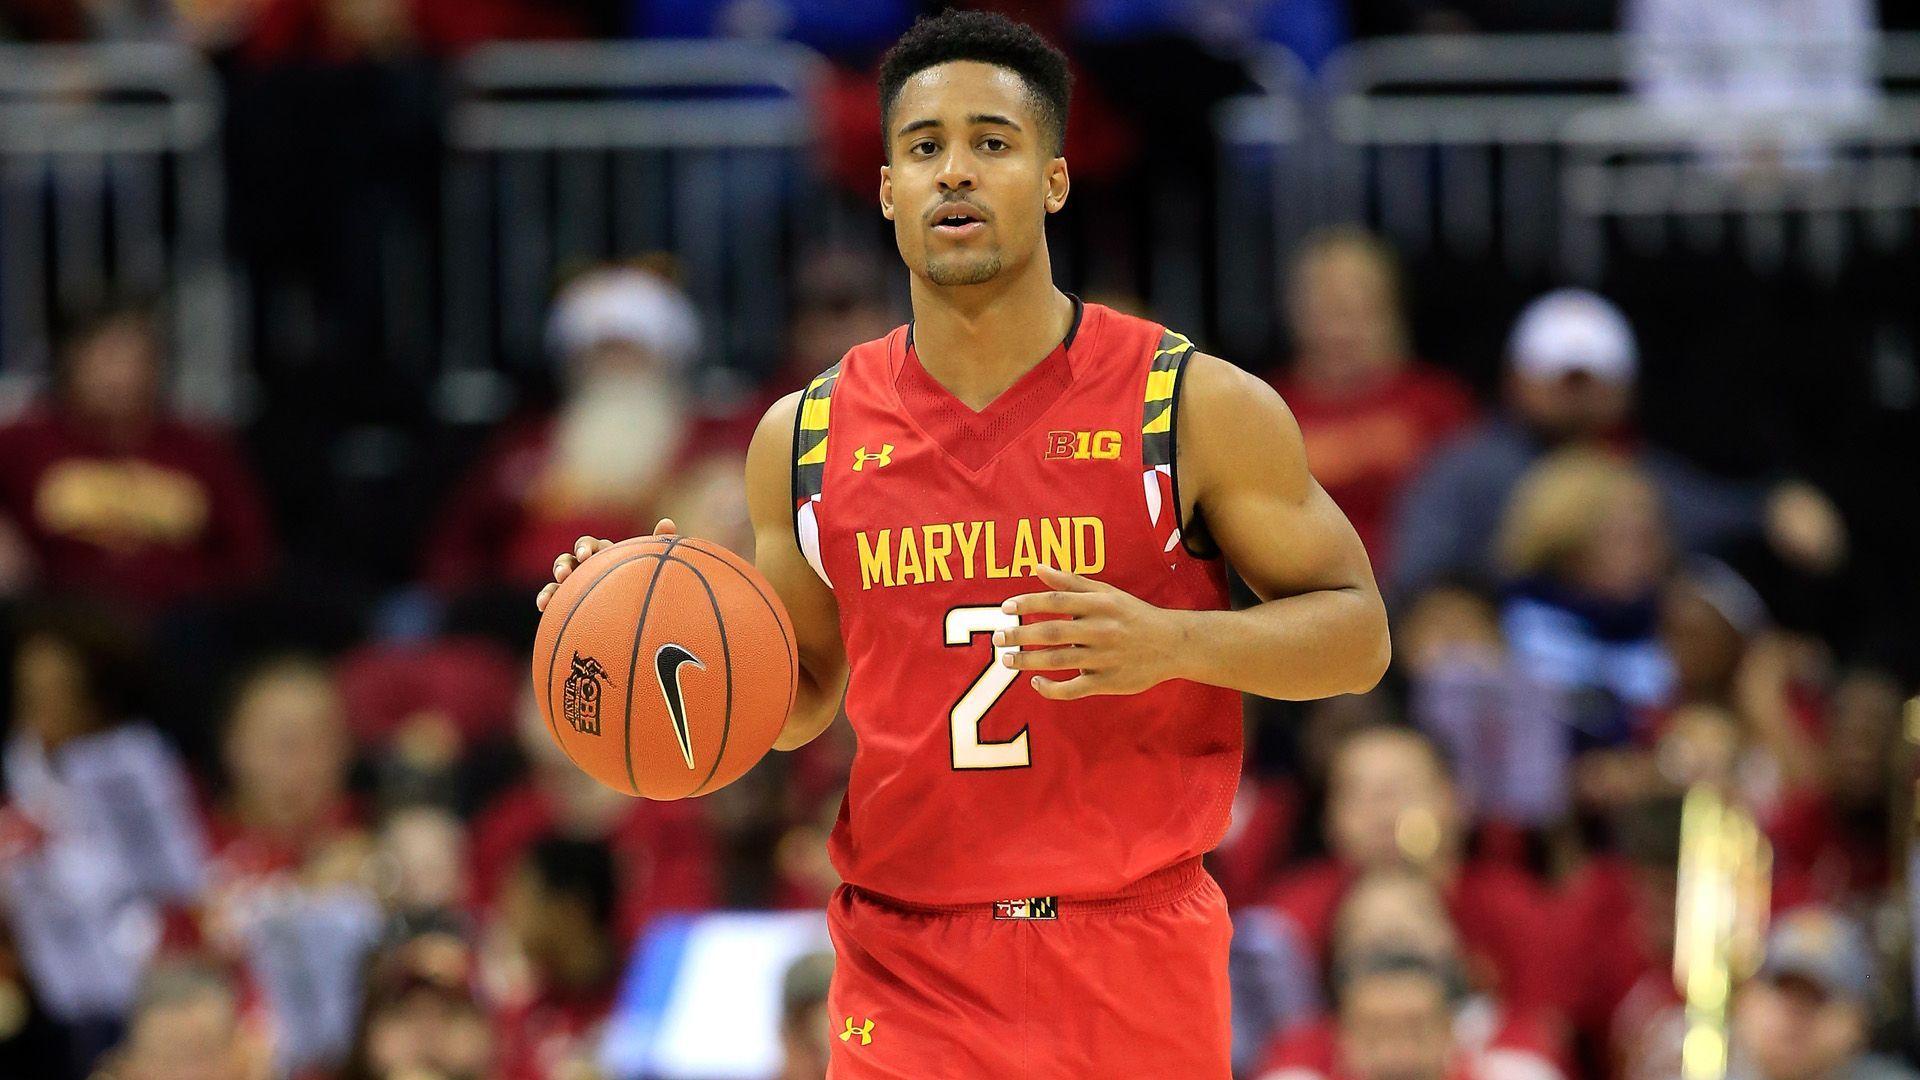 Maryland&;s mellow Melo misses record, but makes name for himself